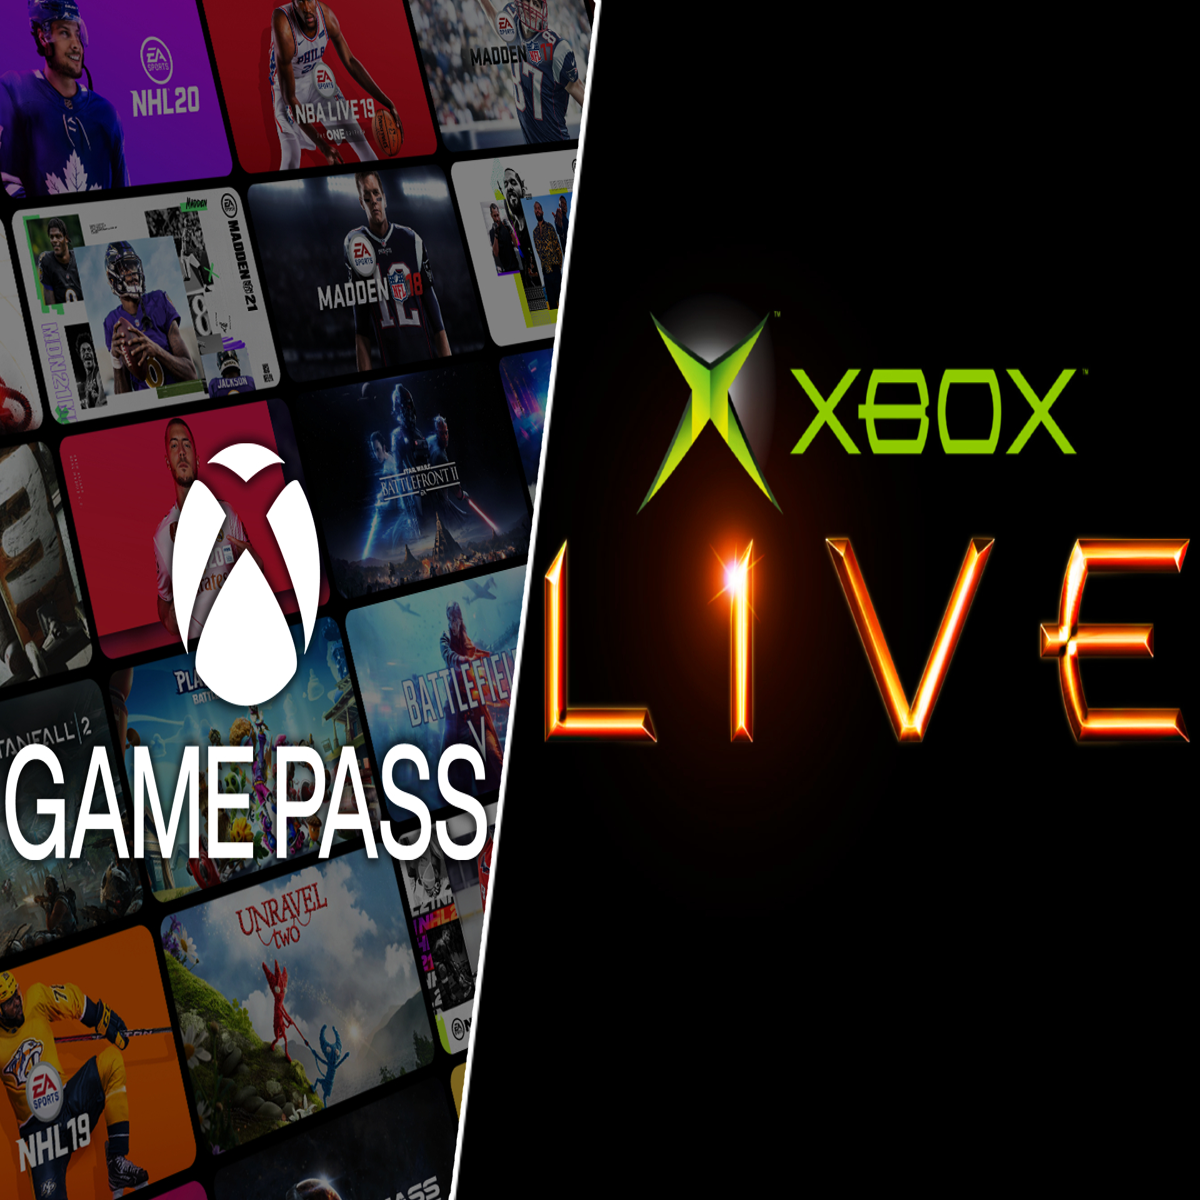 Xbox Game Pass Core: All 19 confirmed games included in cheap Game